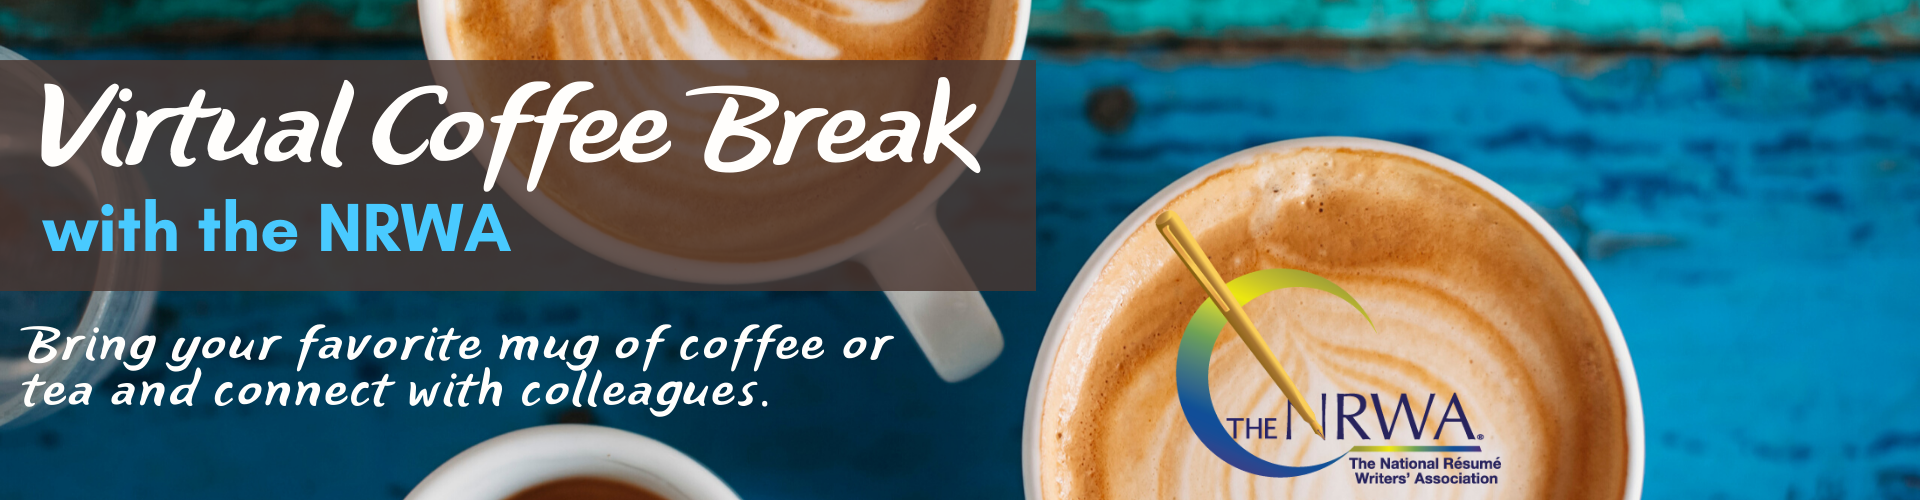 Virtual Coffee Break with the NRWA - Bring your favorite mug of coffee or tea and connect with colleagues.